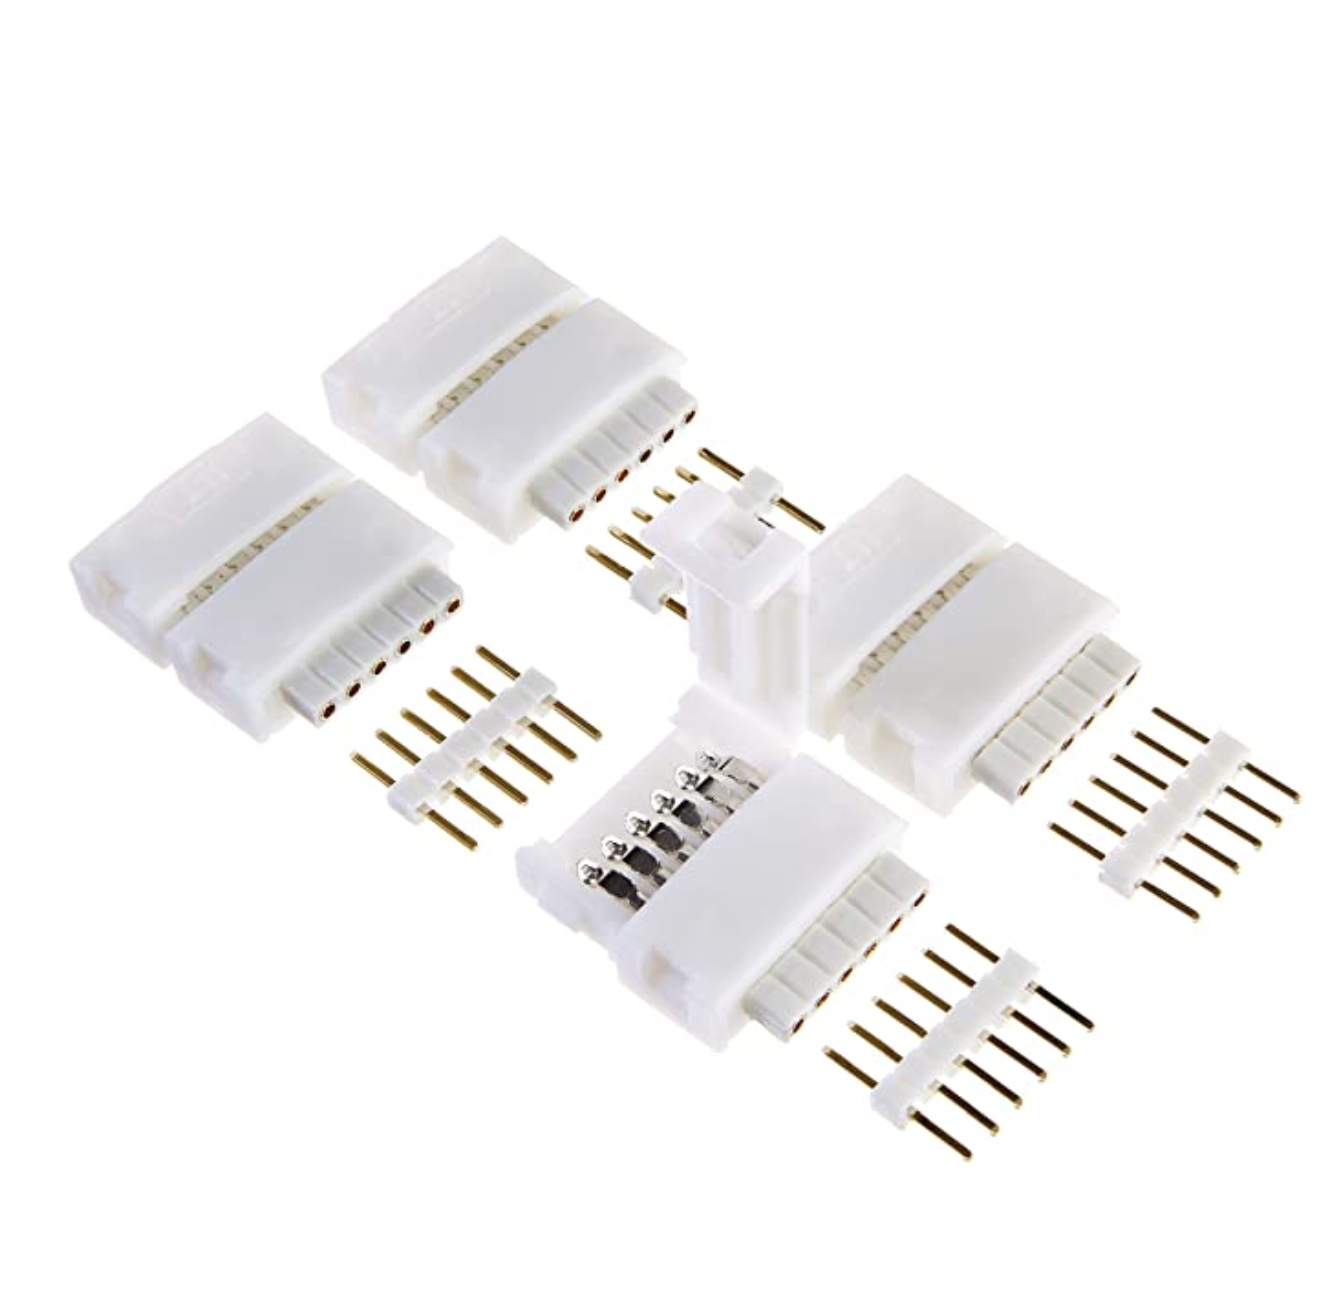 6-pin to shortened end connector for Philips Hue Lightstrip